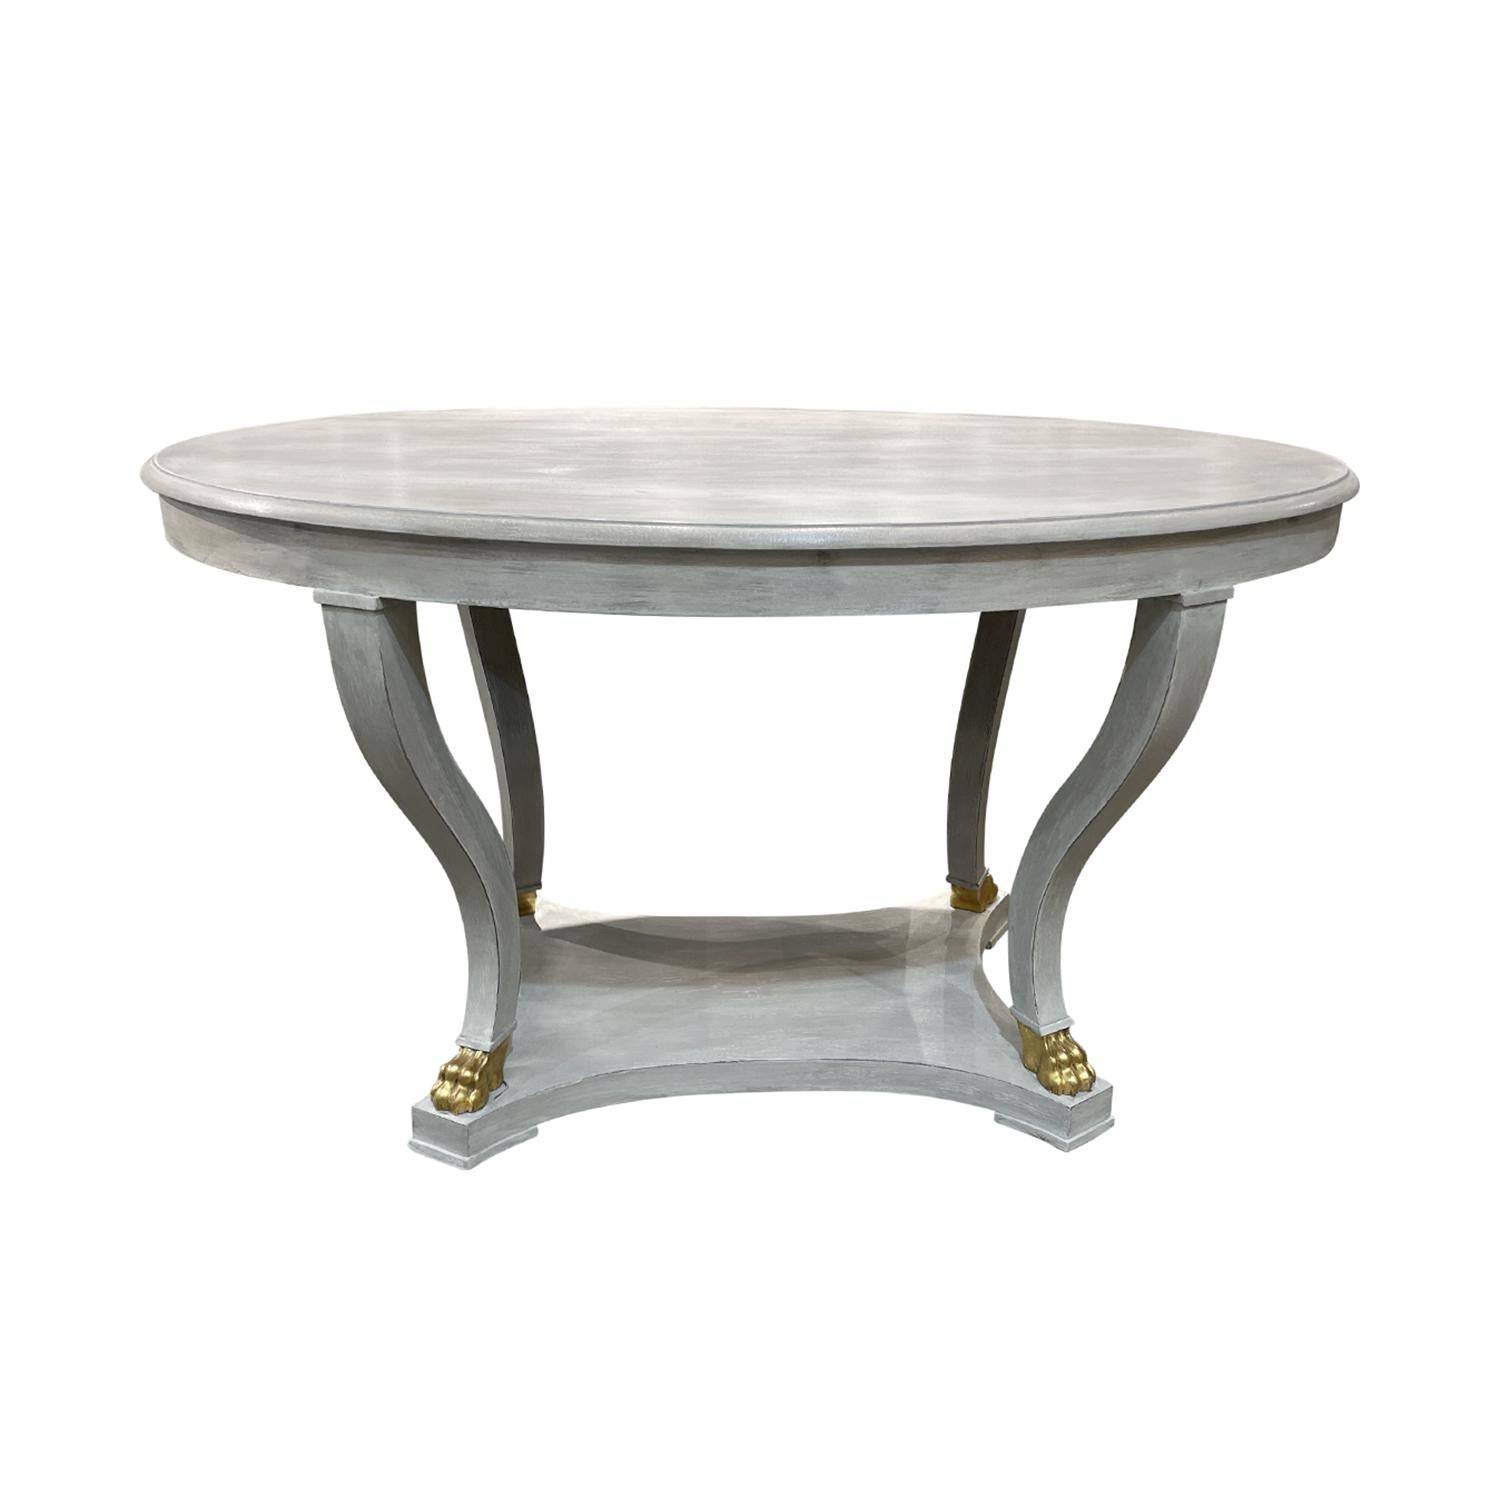 Hand-Carved 19th Century Light-Grey Swedish Gustavian Antique Oval Pine Dining Room Table For Sale